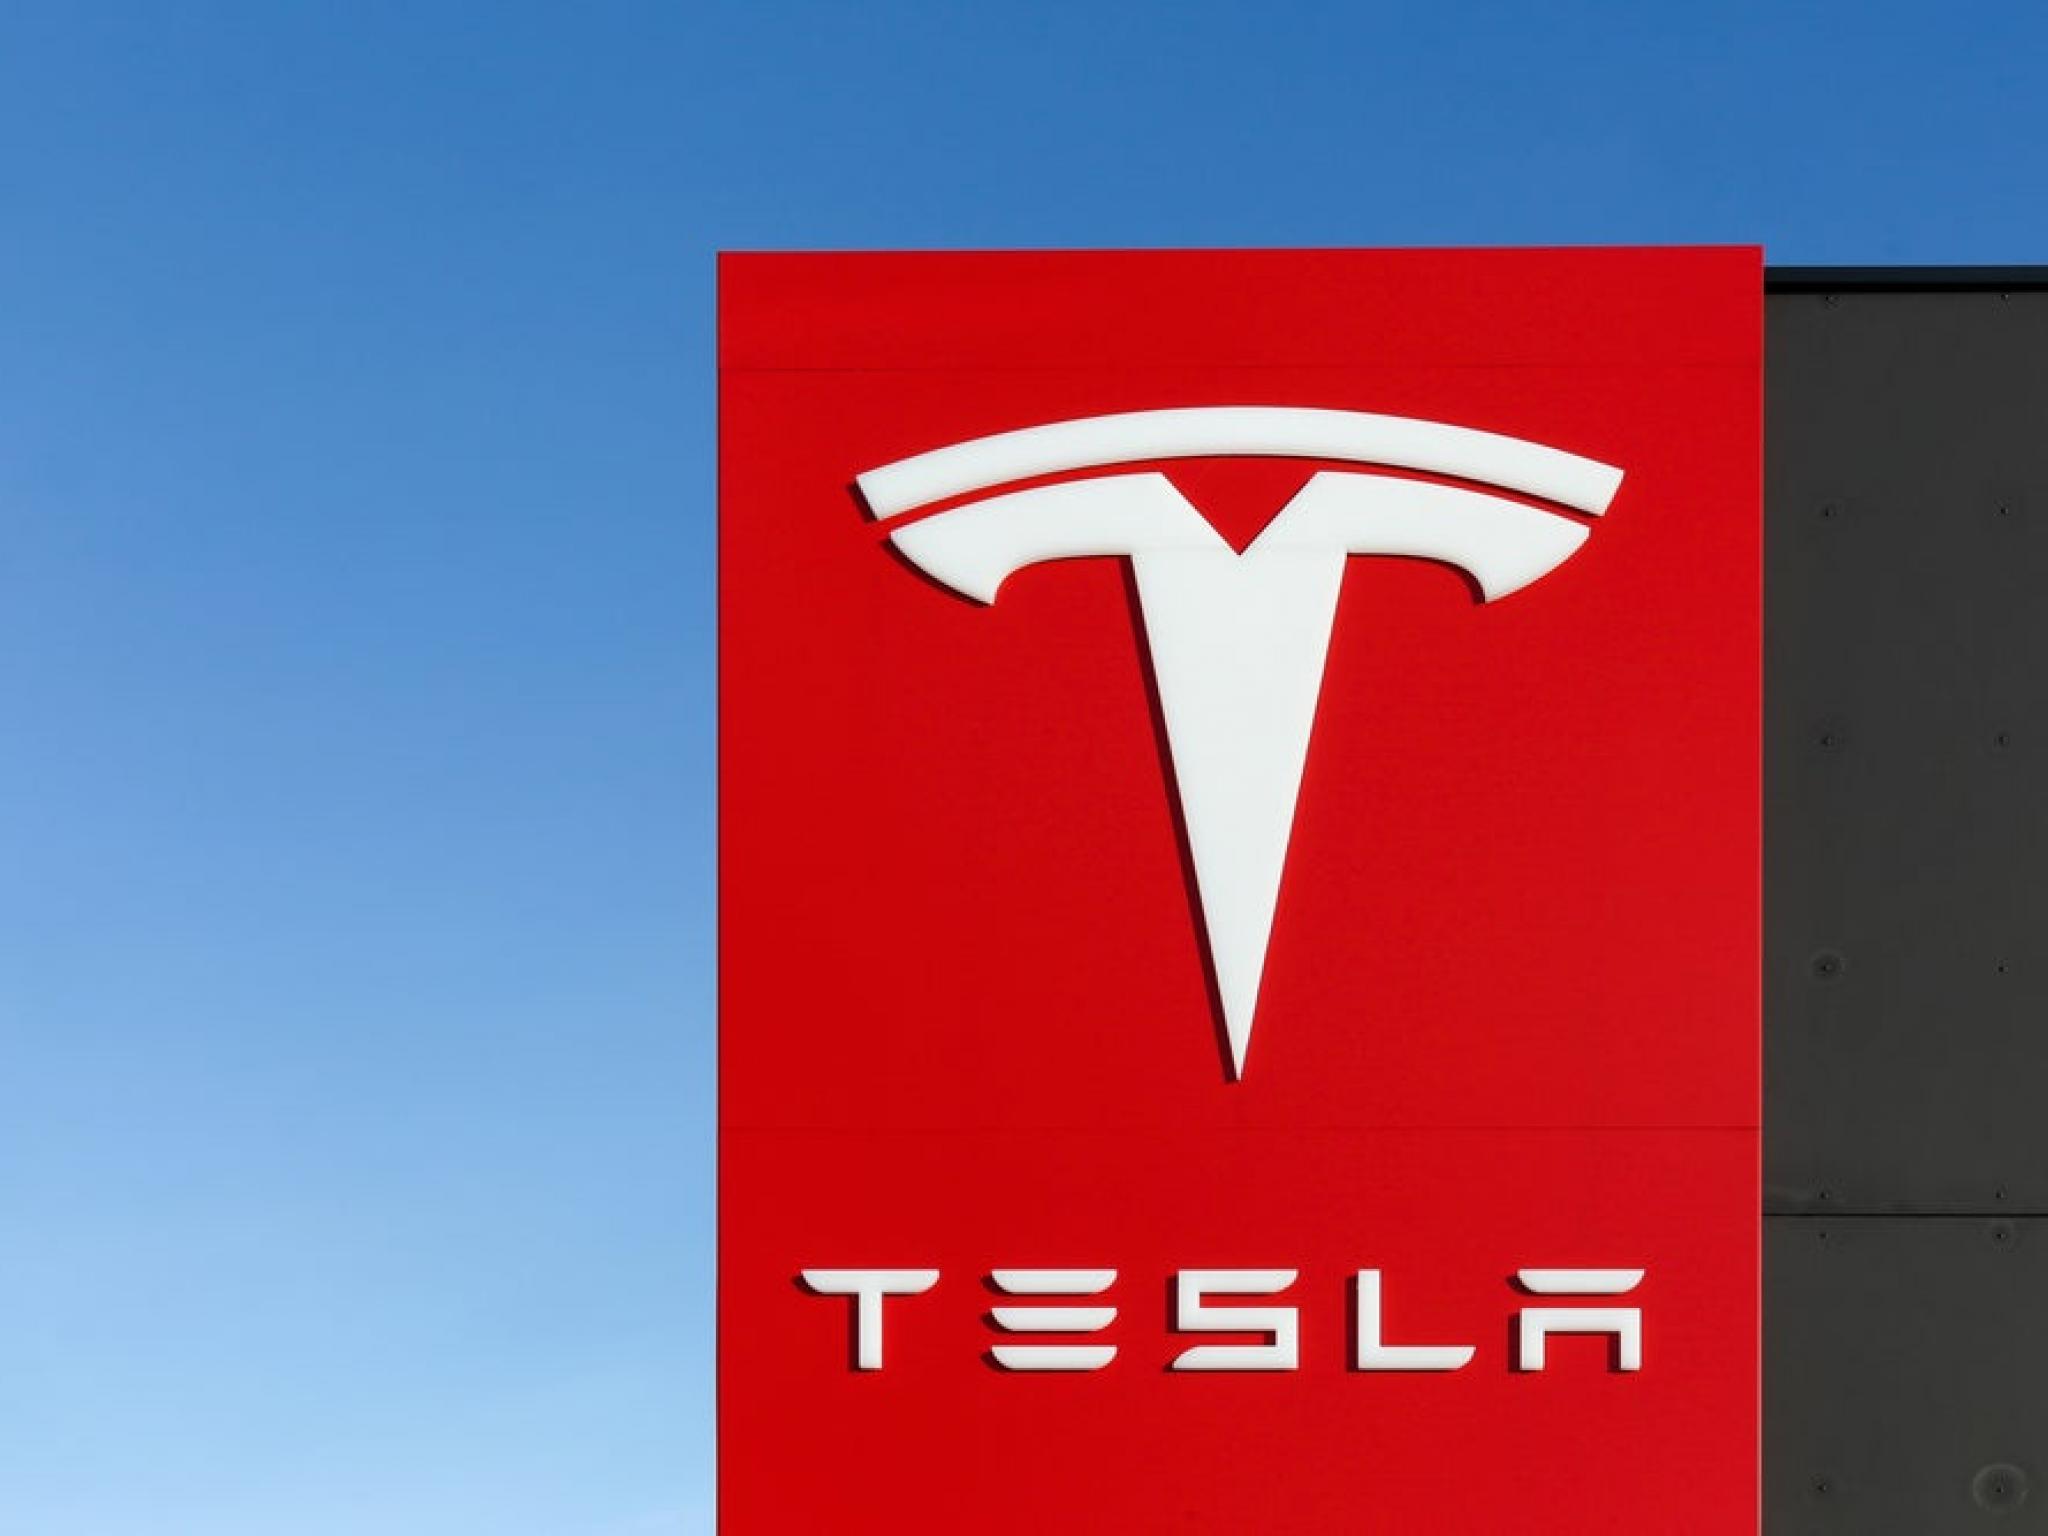  tesla-nvidia-john-wiley--sons-and-other-big-stocks-moving-higher-on-thursday 